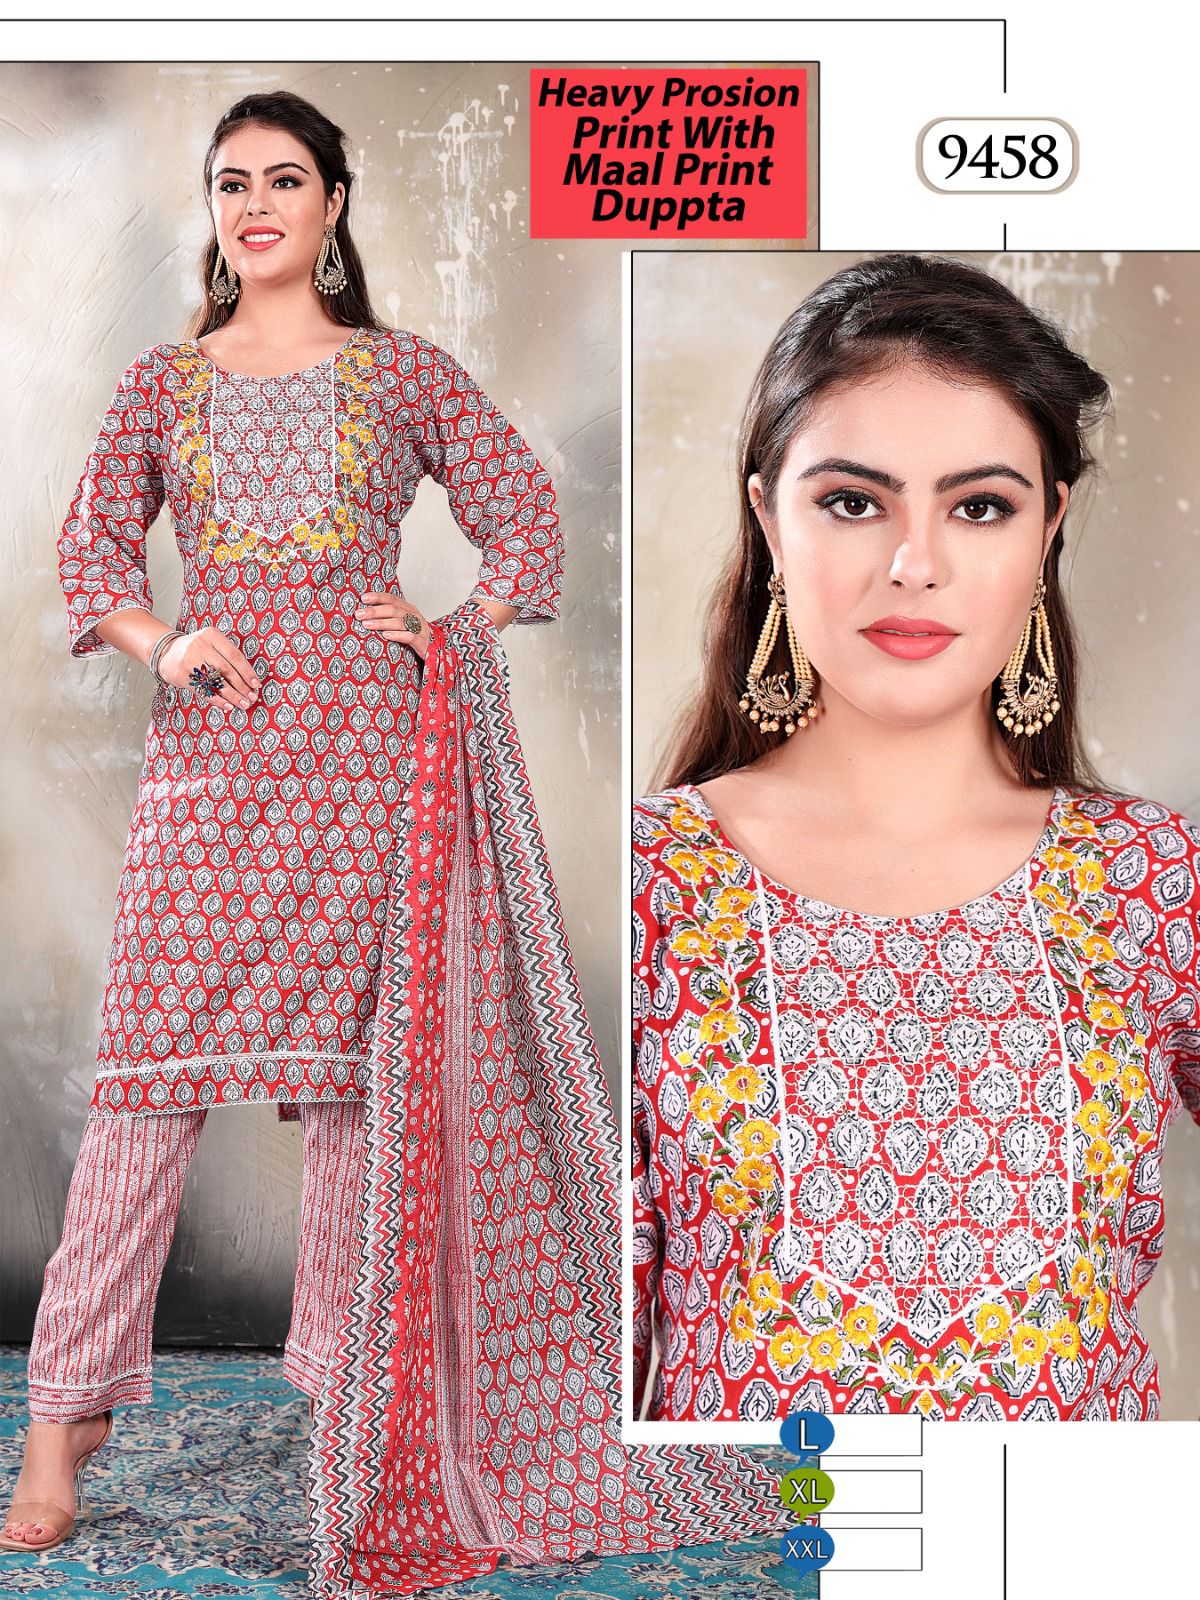 Prosion Print Mmc Readymade Pant Style Suits